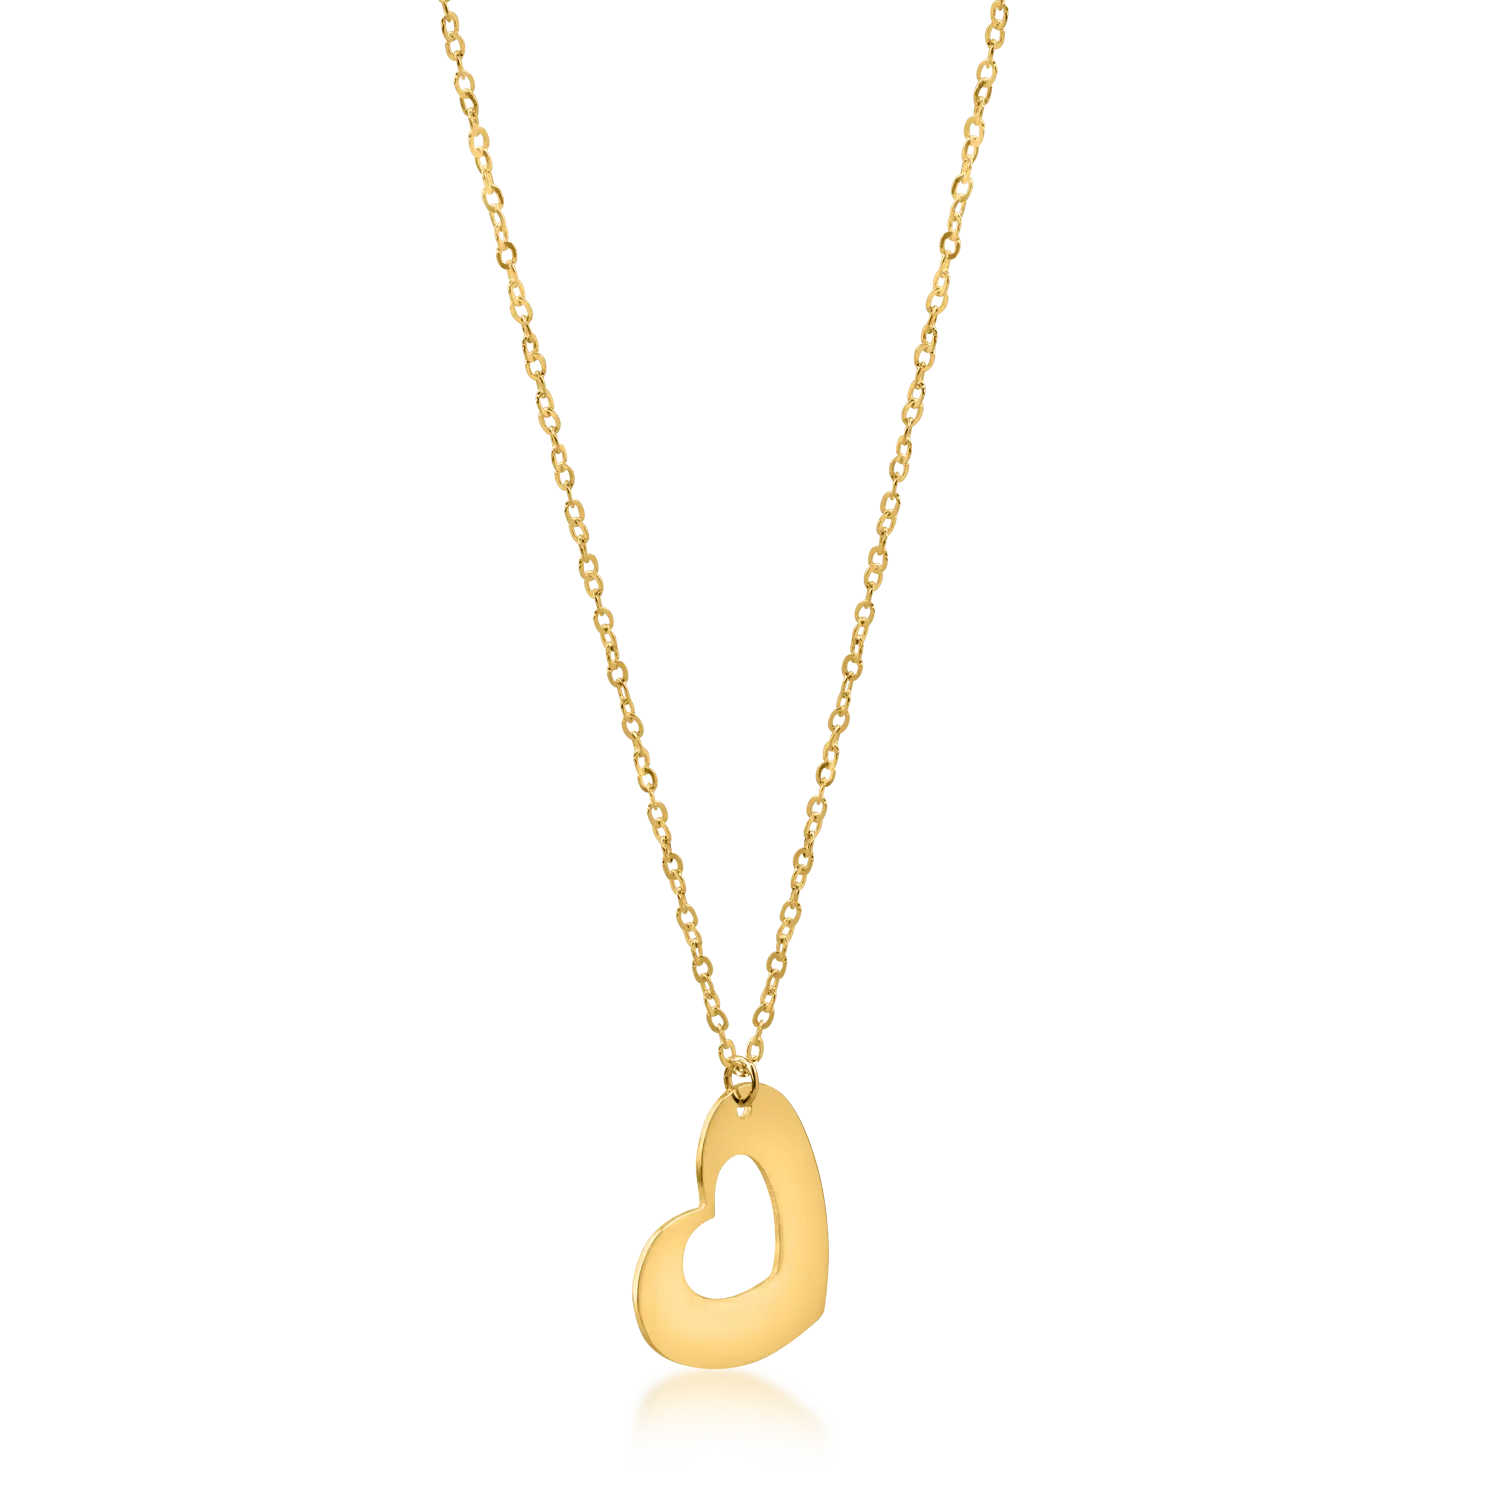 Yellow gold heart pendant necklace